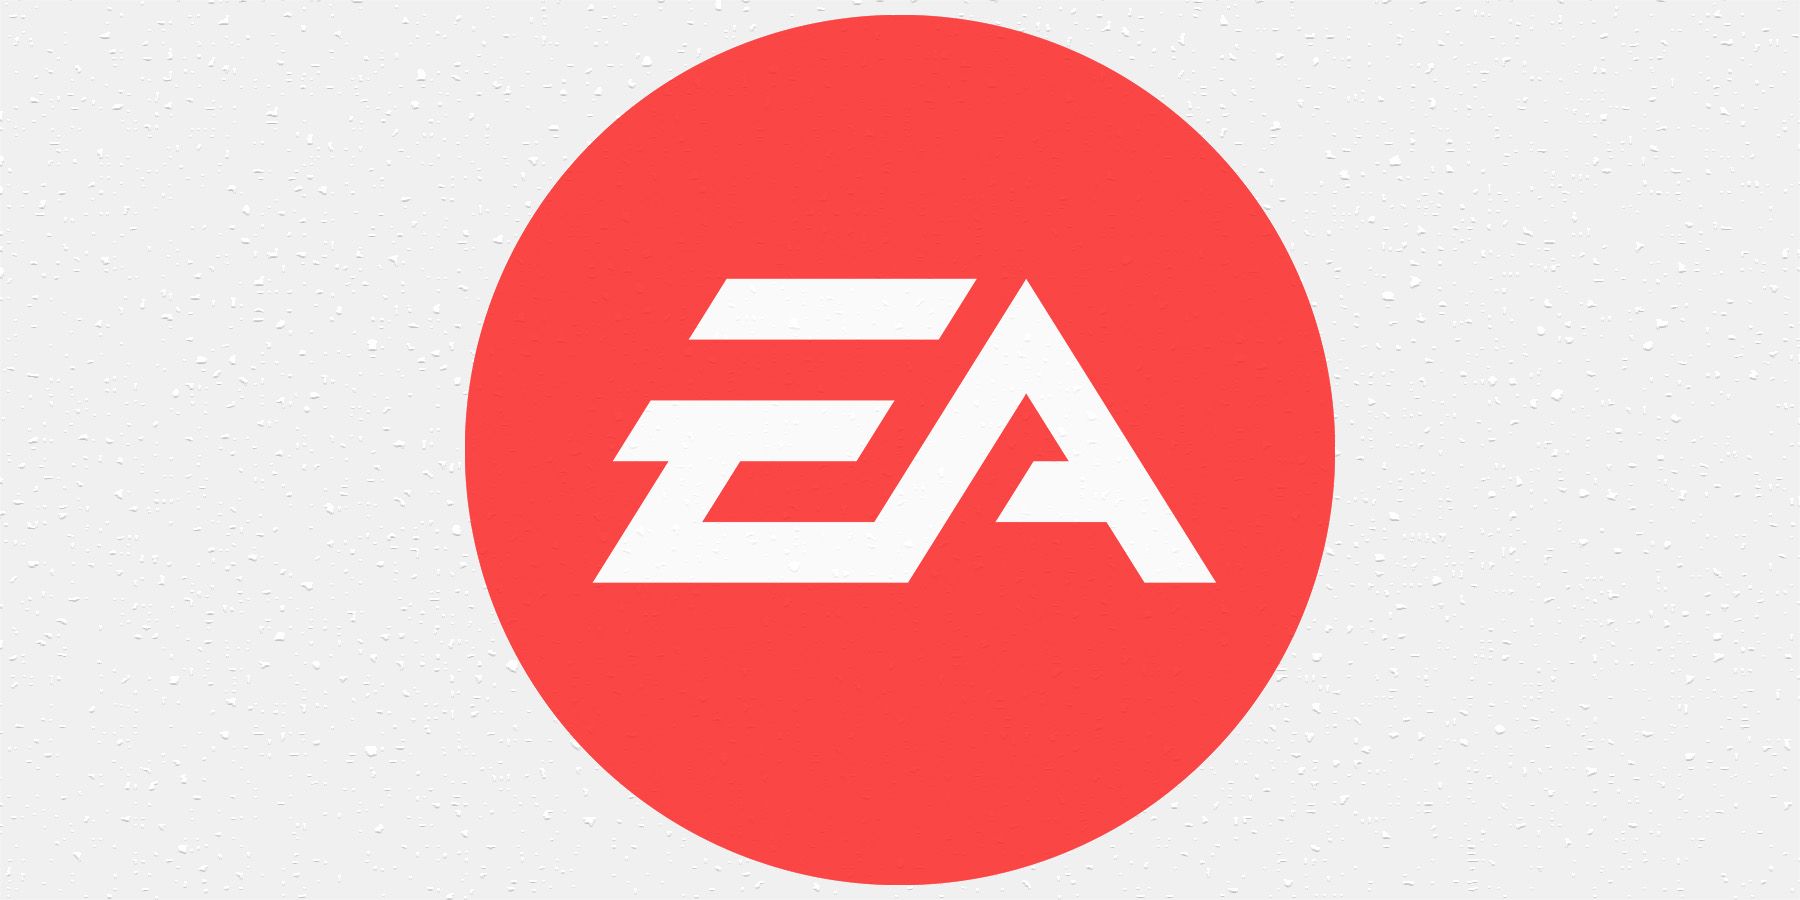 EA logo in coral red on light gray speckled background